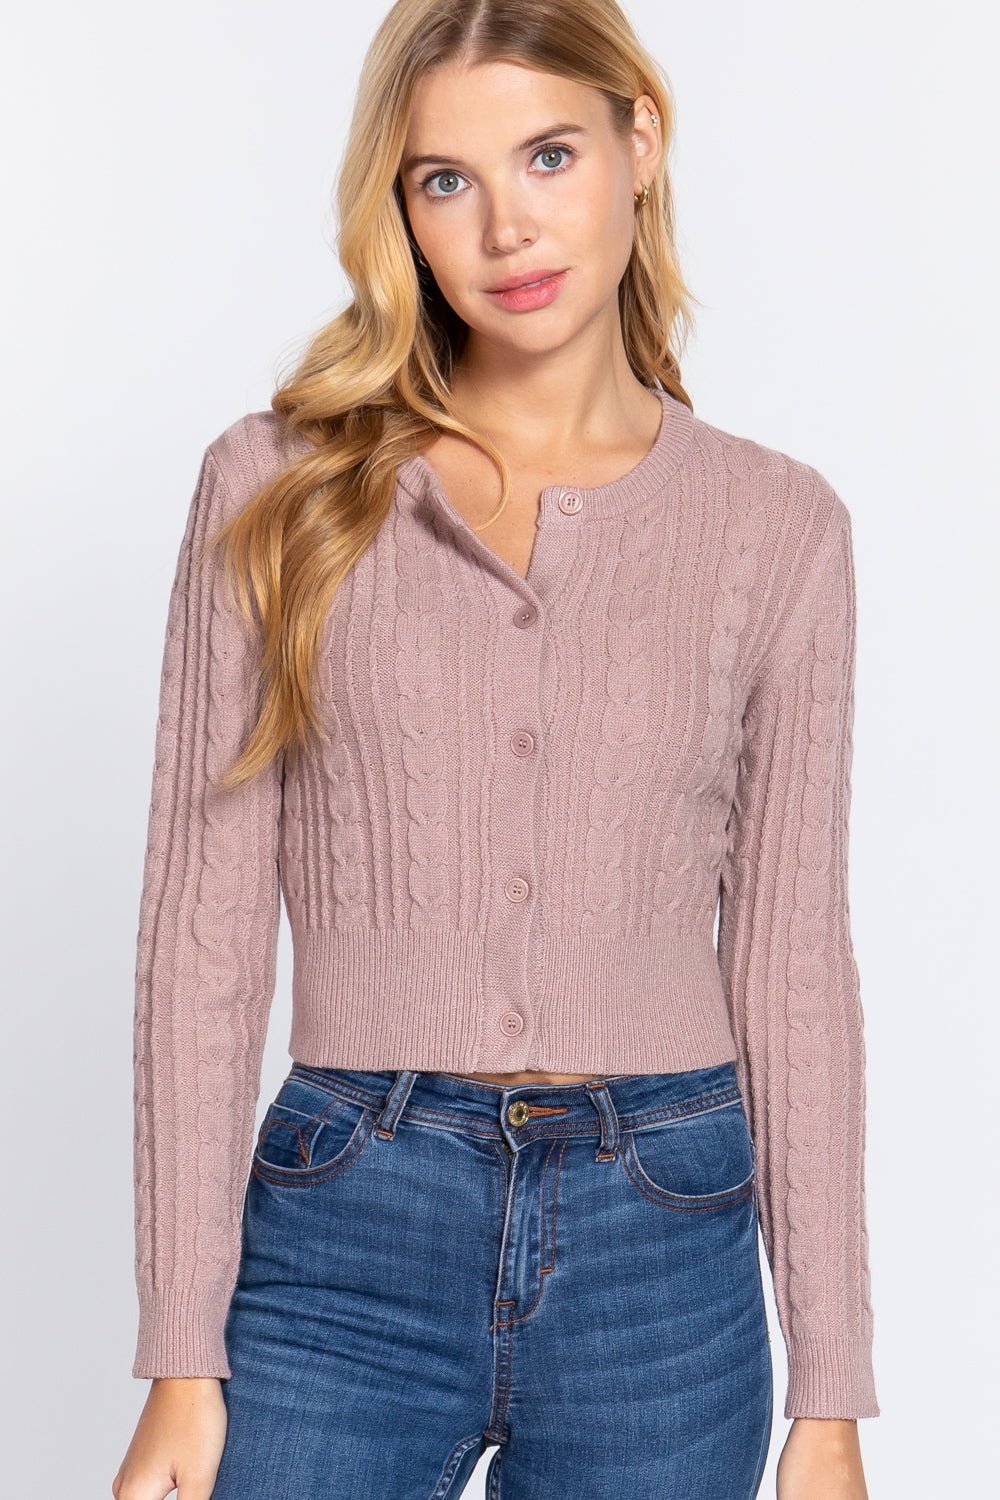 Crew Neck Cable Sweater Cardigan-57027.S-Select Size: S-Love It Clothing